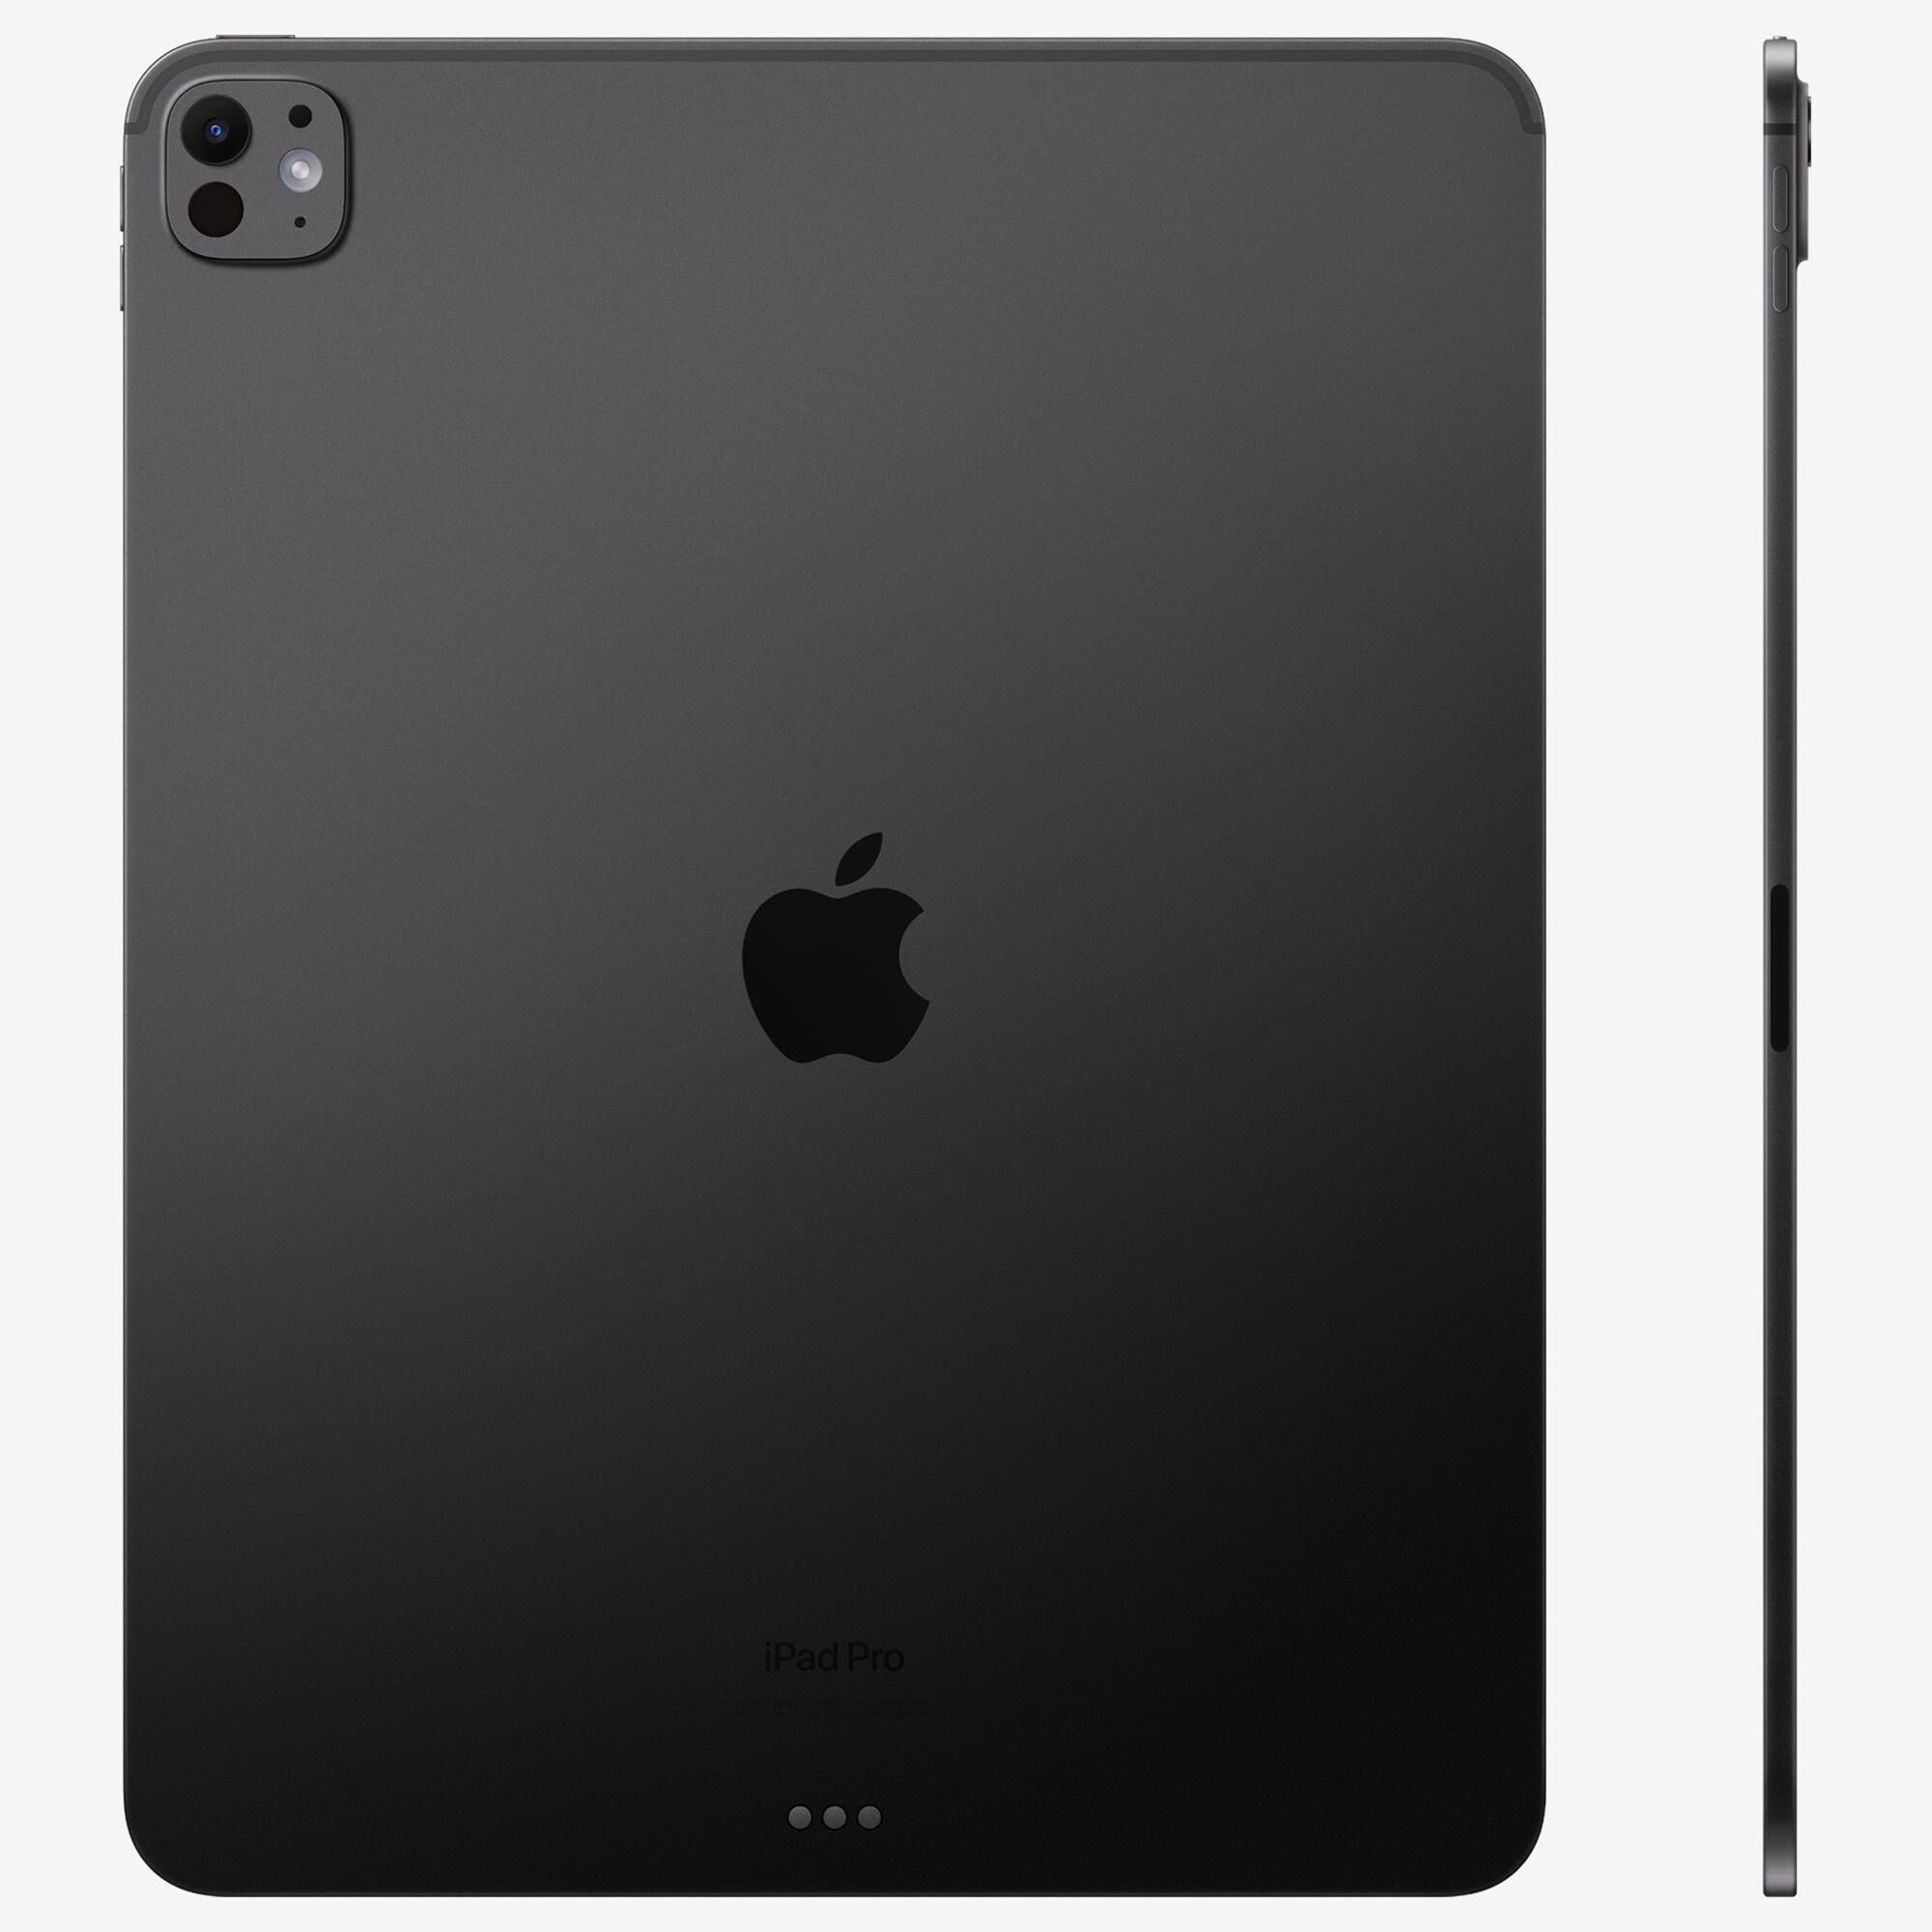 Apple iPad Pro 11-Inch M4 chip with Wi-Fi + Cellular - 256GB in Space Black  (Pre-Sale) | Shop NFM